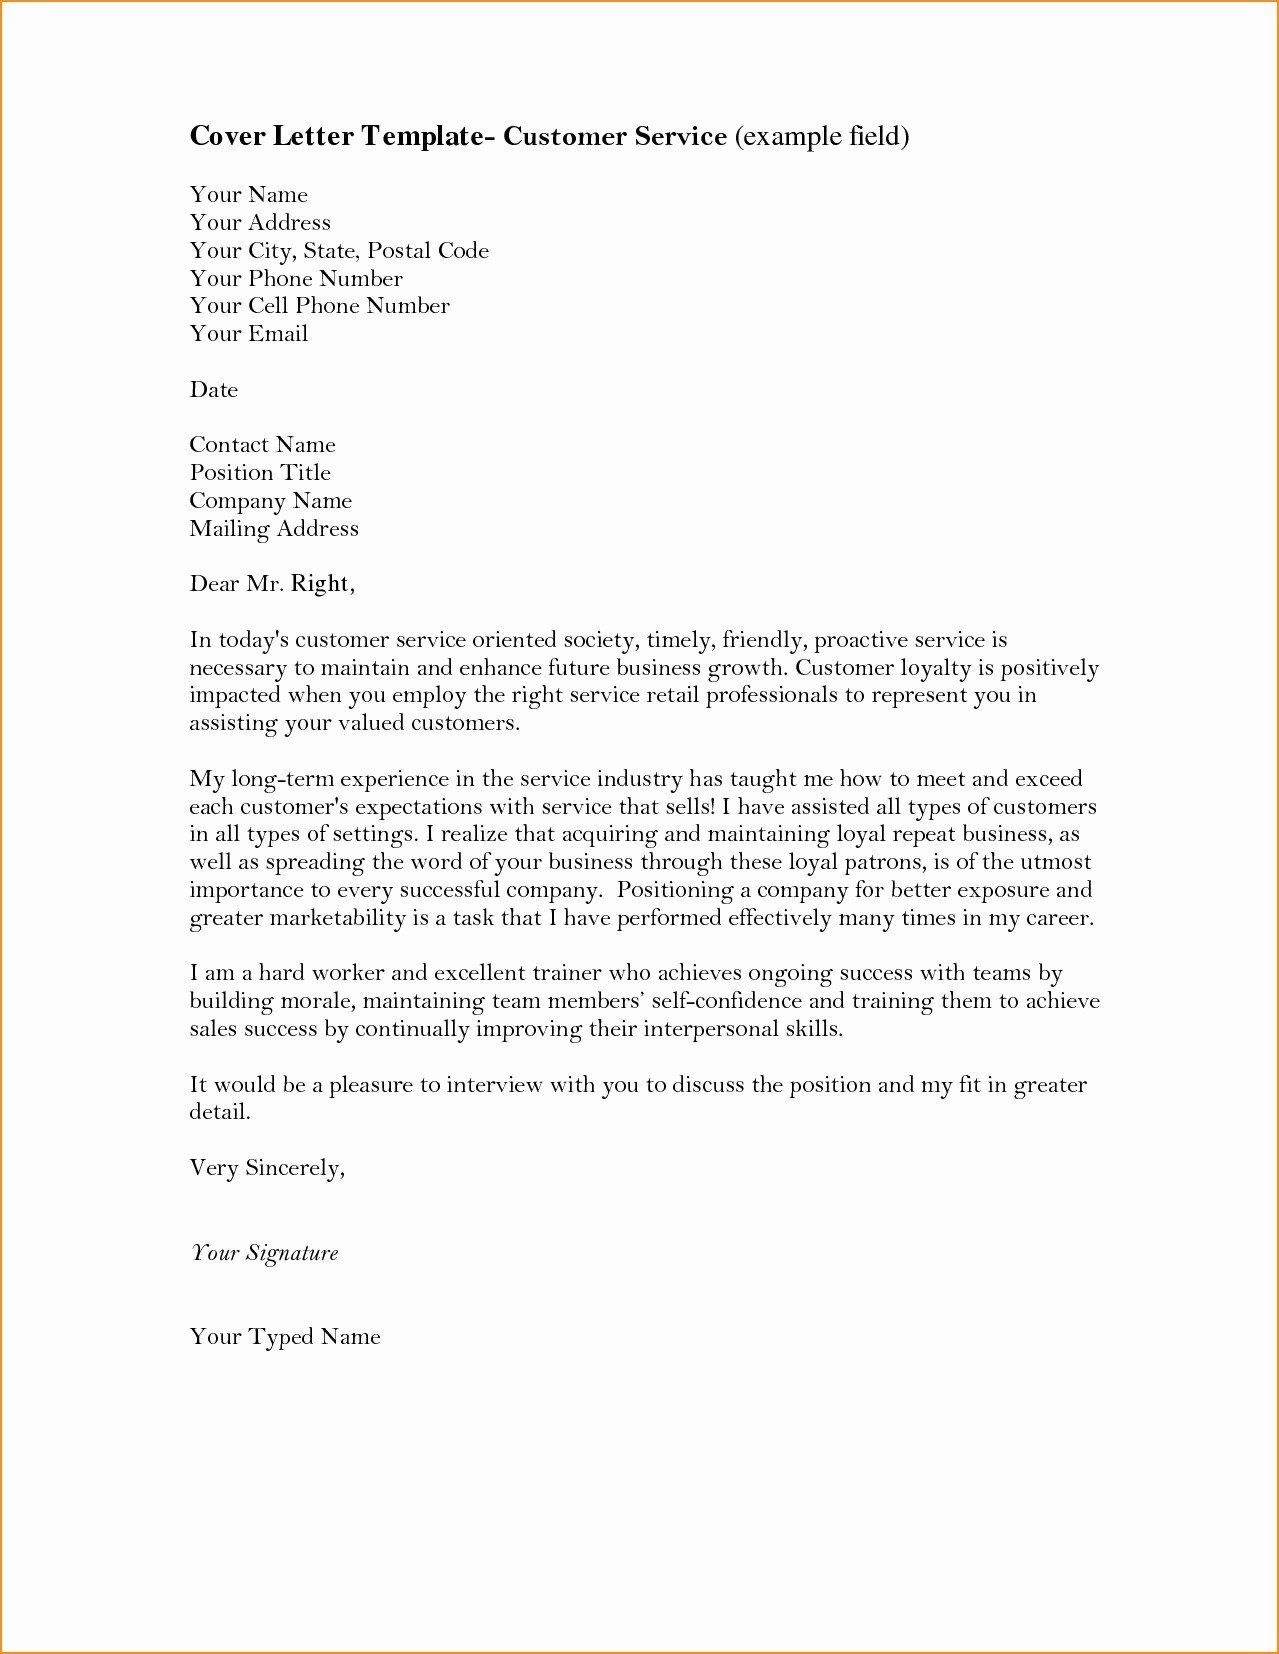 Cancel Service Contract Letter Template - Cover Letter for A Customer Service Job Inspirationa Save